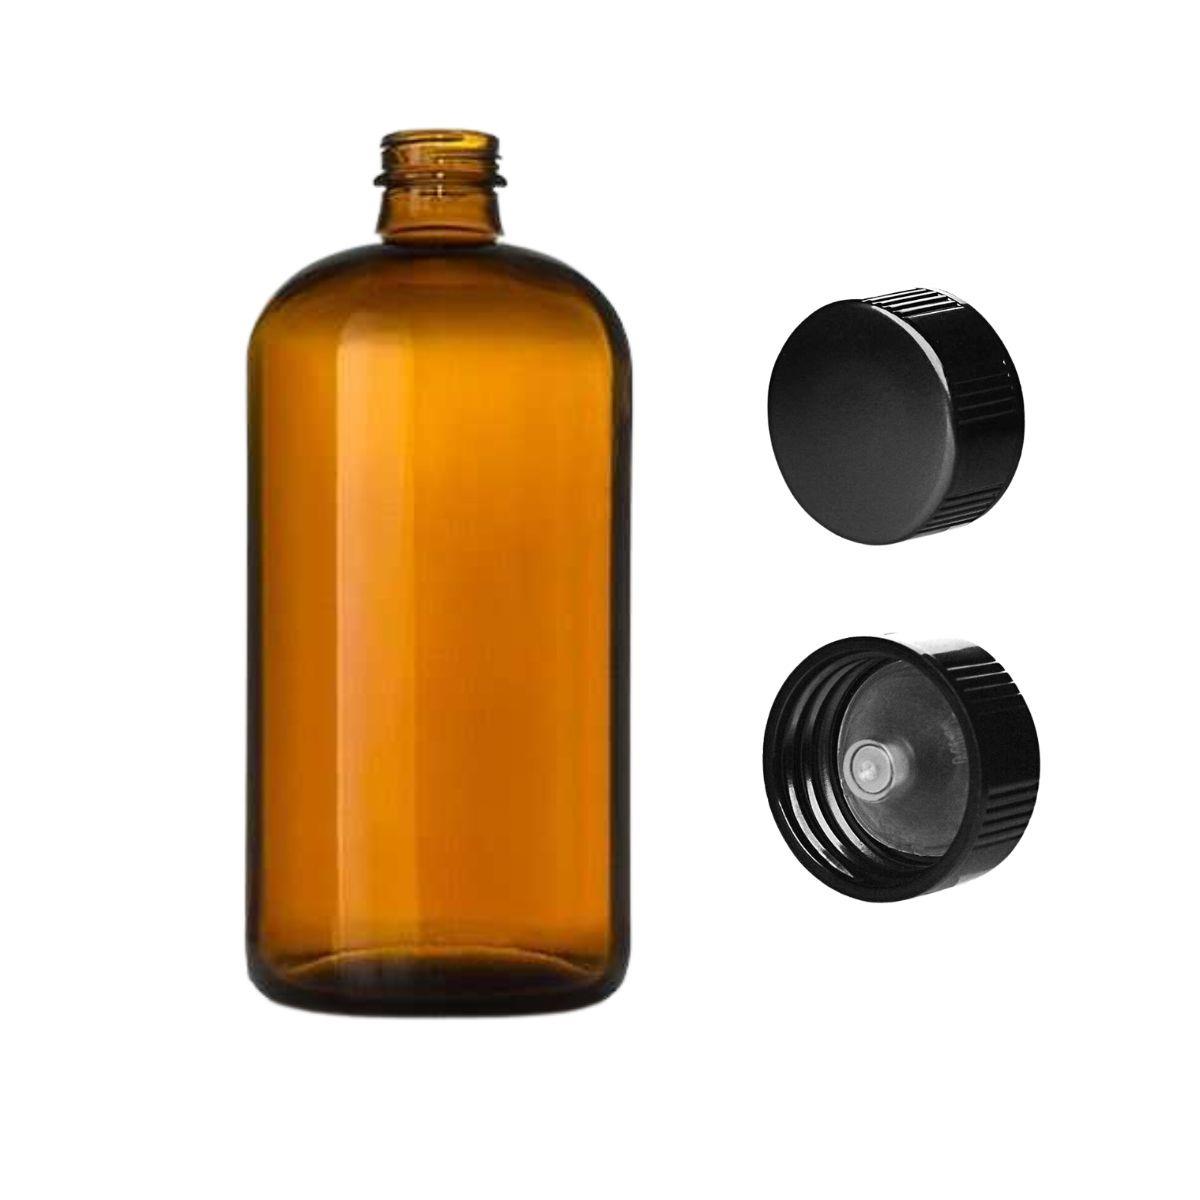 32 oz Amber Glass Bottle with Lid